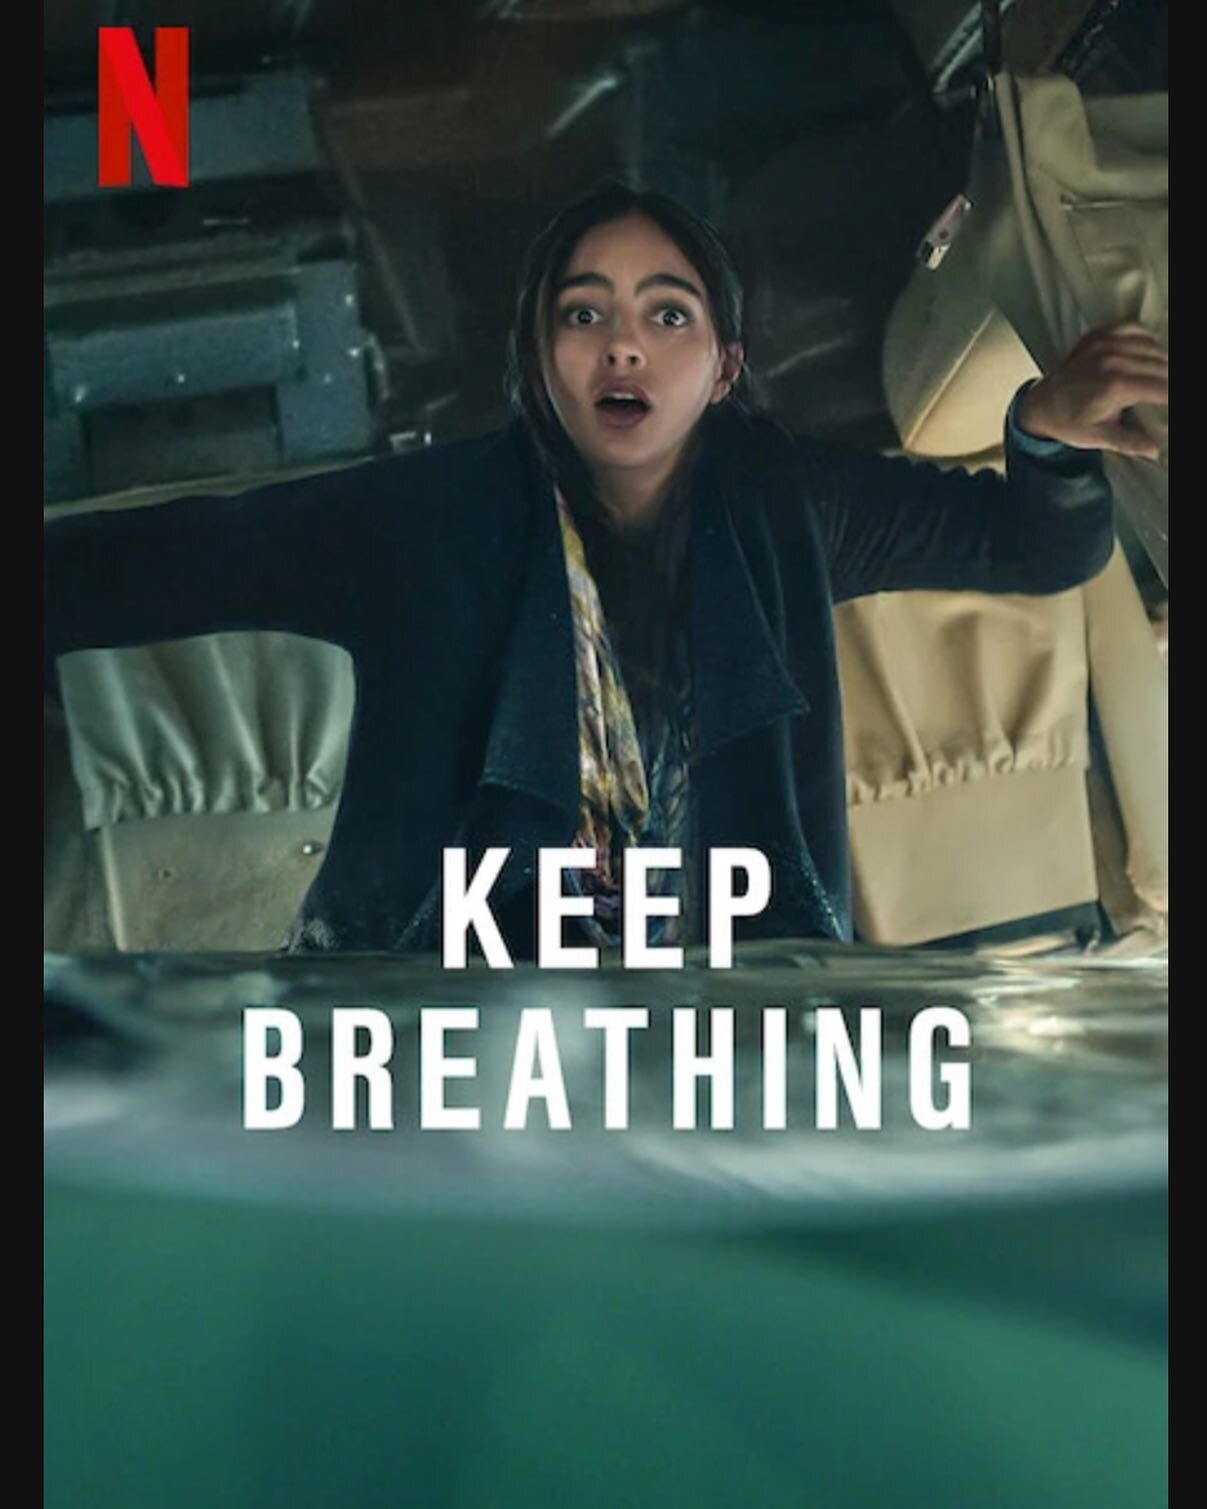 @mappeof&rsquo;s stunning cover of @wintersleeptheband&rsquo;s song &lsquo;Dead Letter &amp; The Infinite Yes&rsquo; gets a mega feature in the new Netflix series &ldquo;Keep Breathing&rdquo; starring Melissa Barrera. Available for streaming (binge w